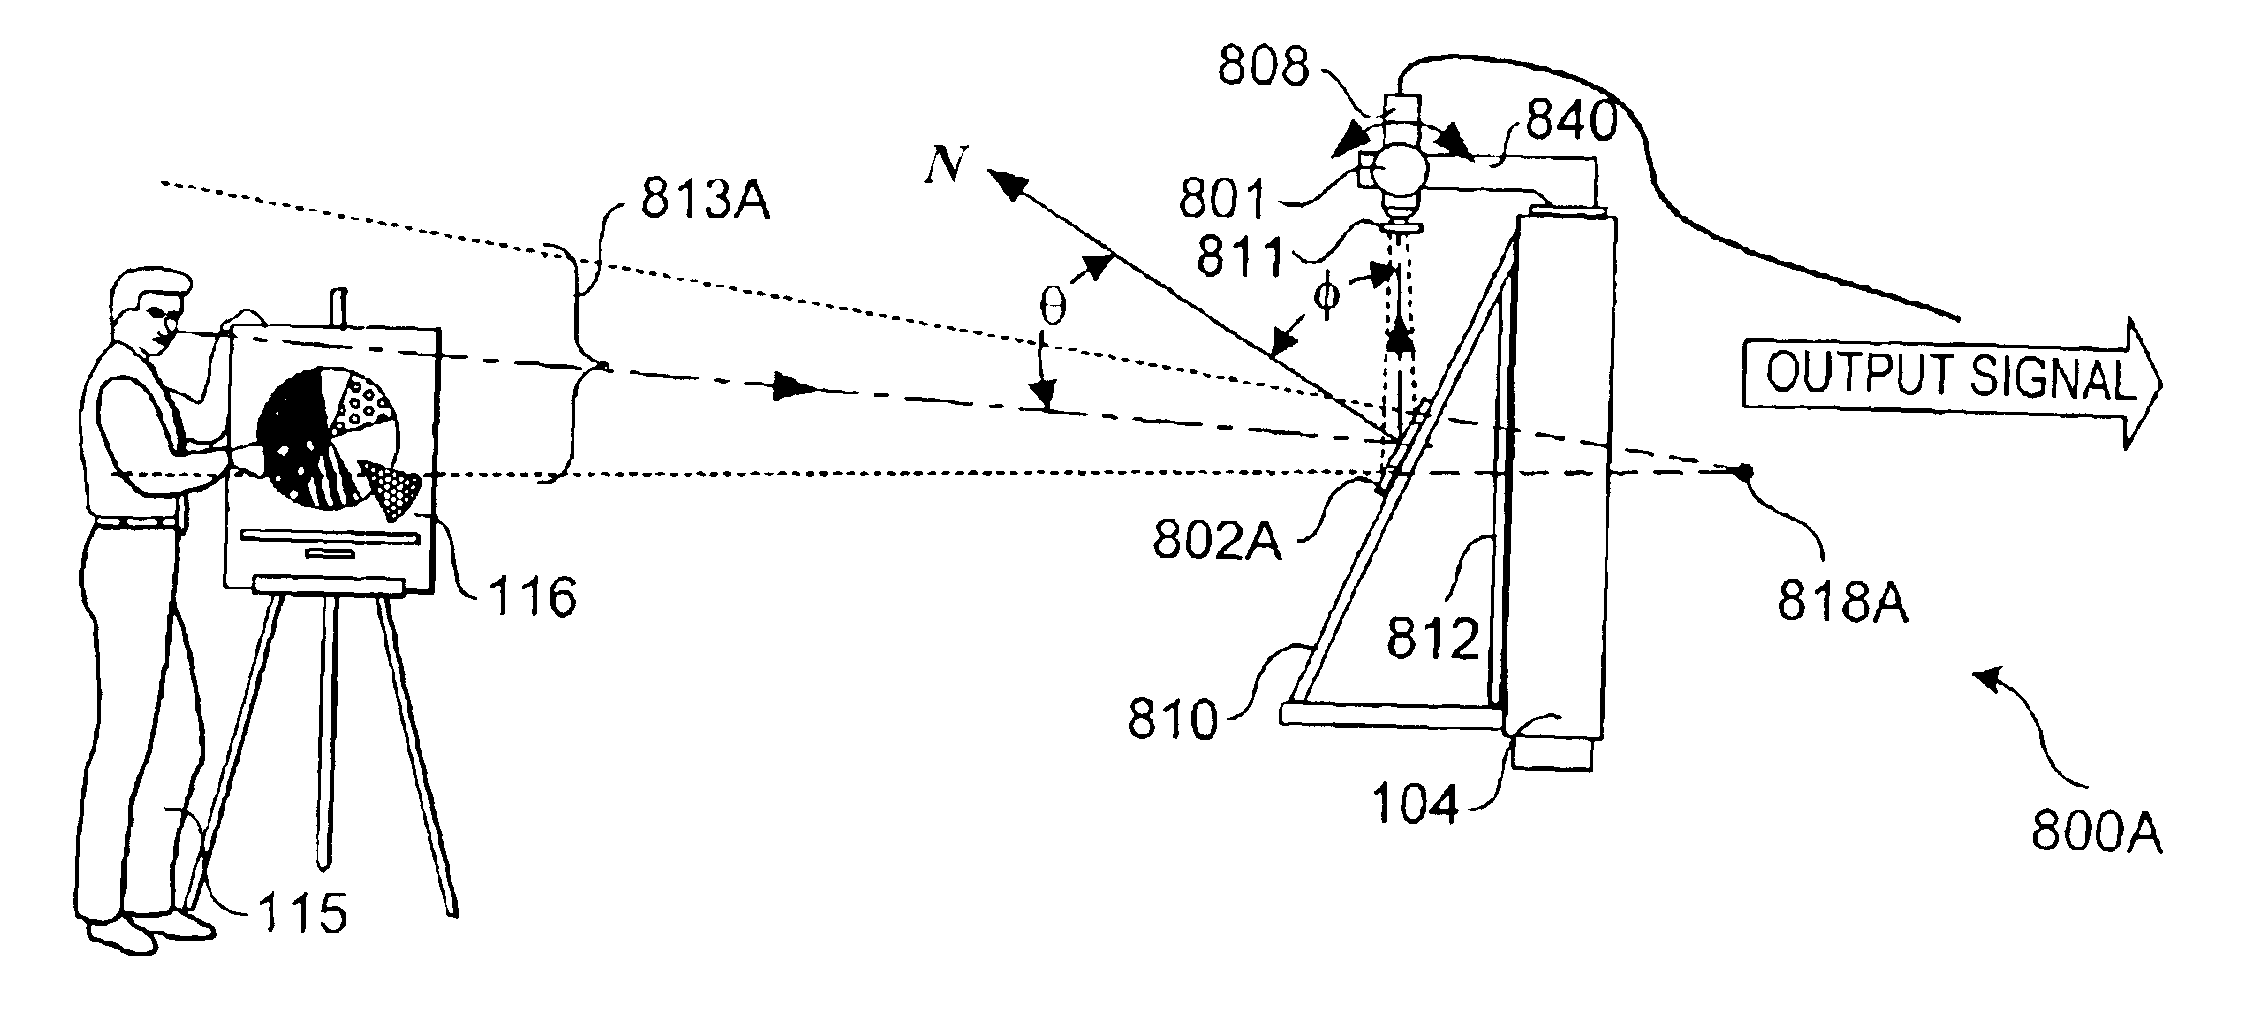 Apparatus, system and method for enabling eye-to-eye contact in video conferences